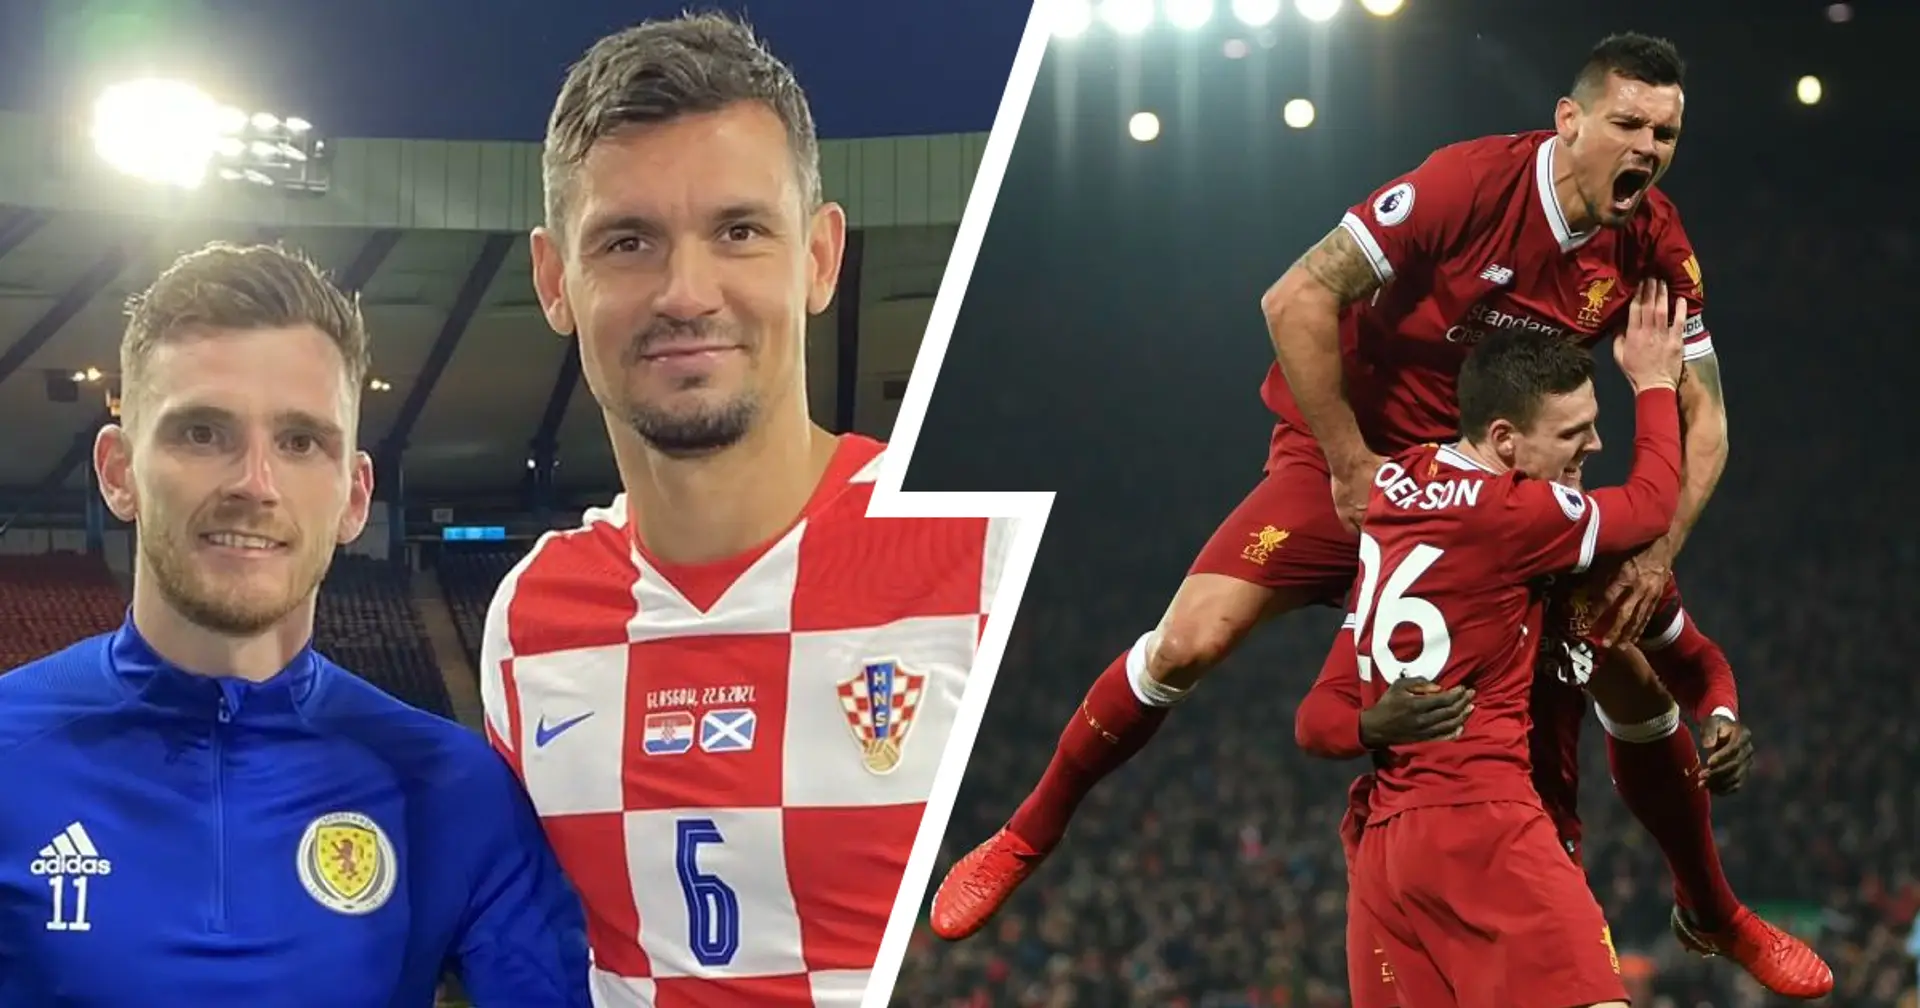 Old friends: Heartwarming moment as Lovren and Robertson catch up with one another following Euros clash